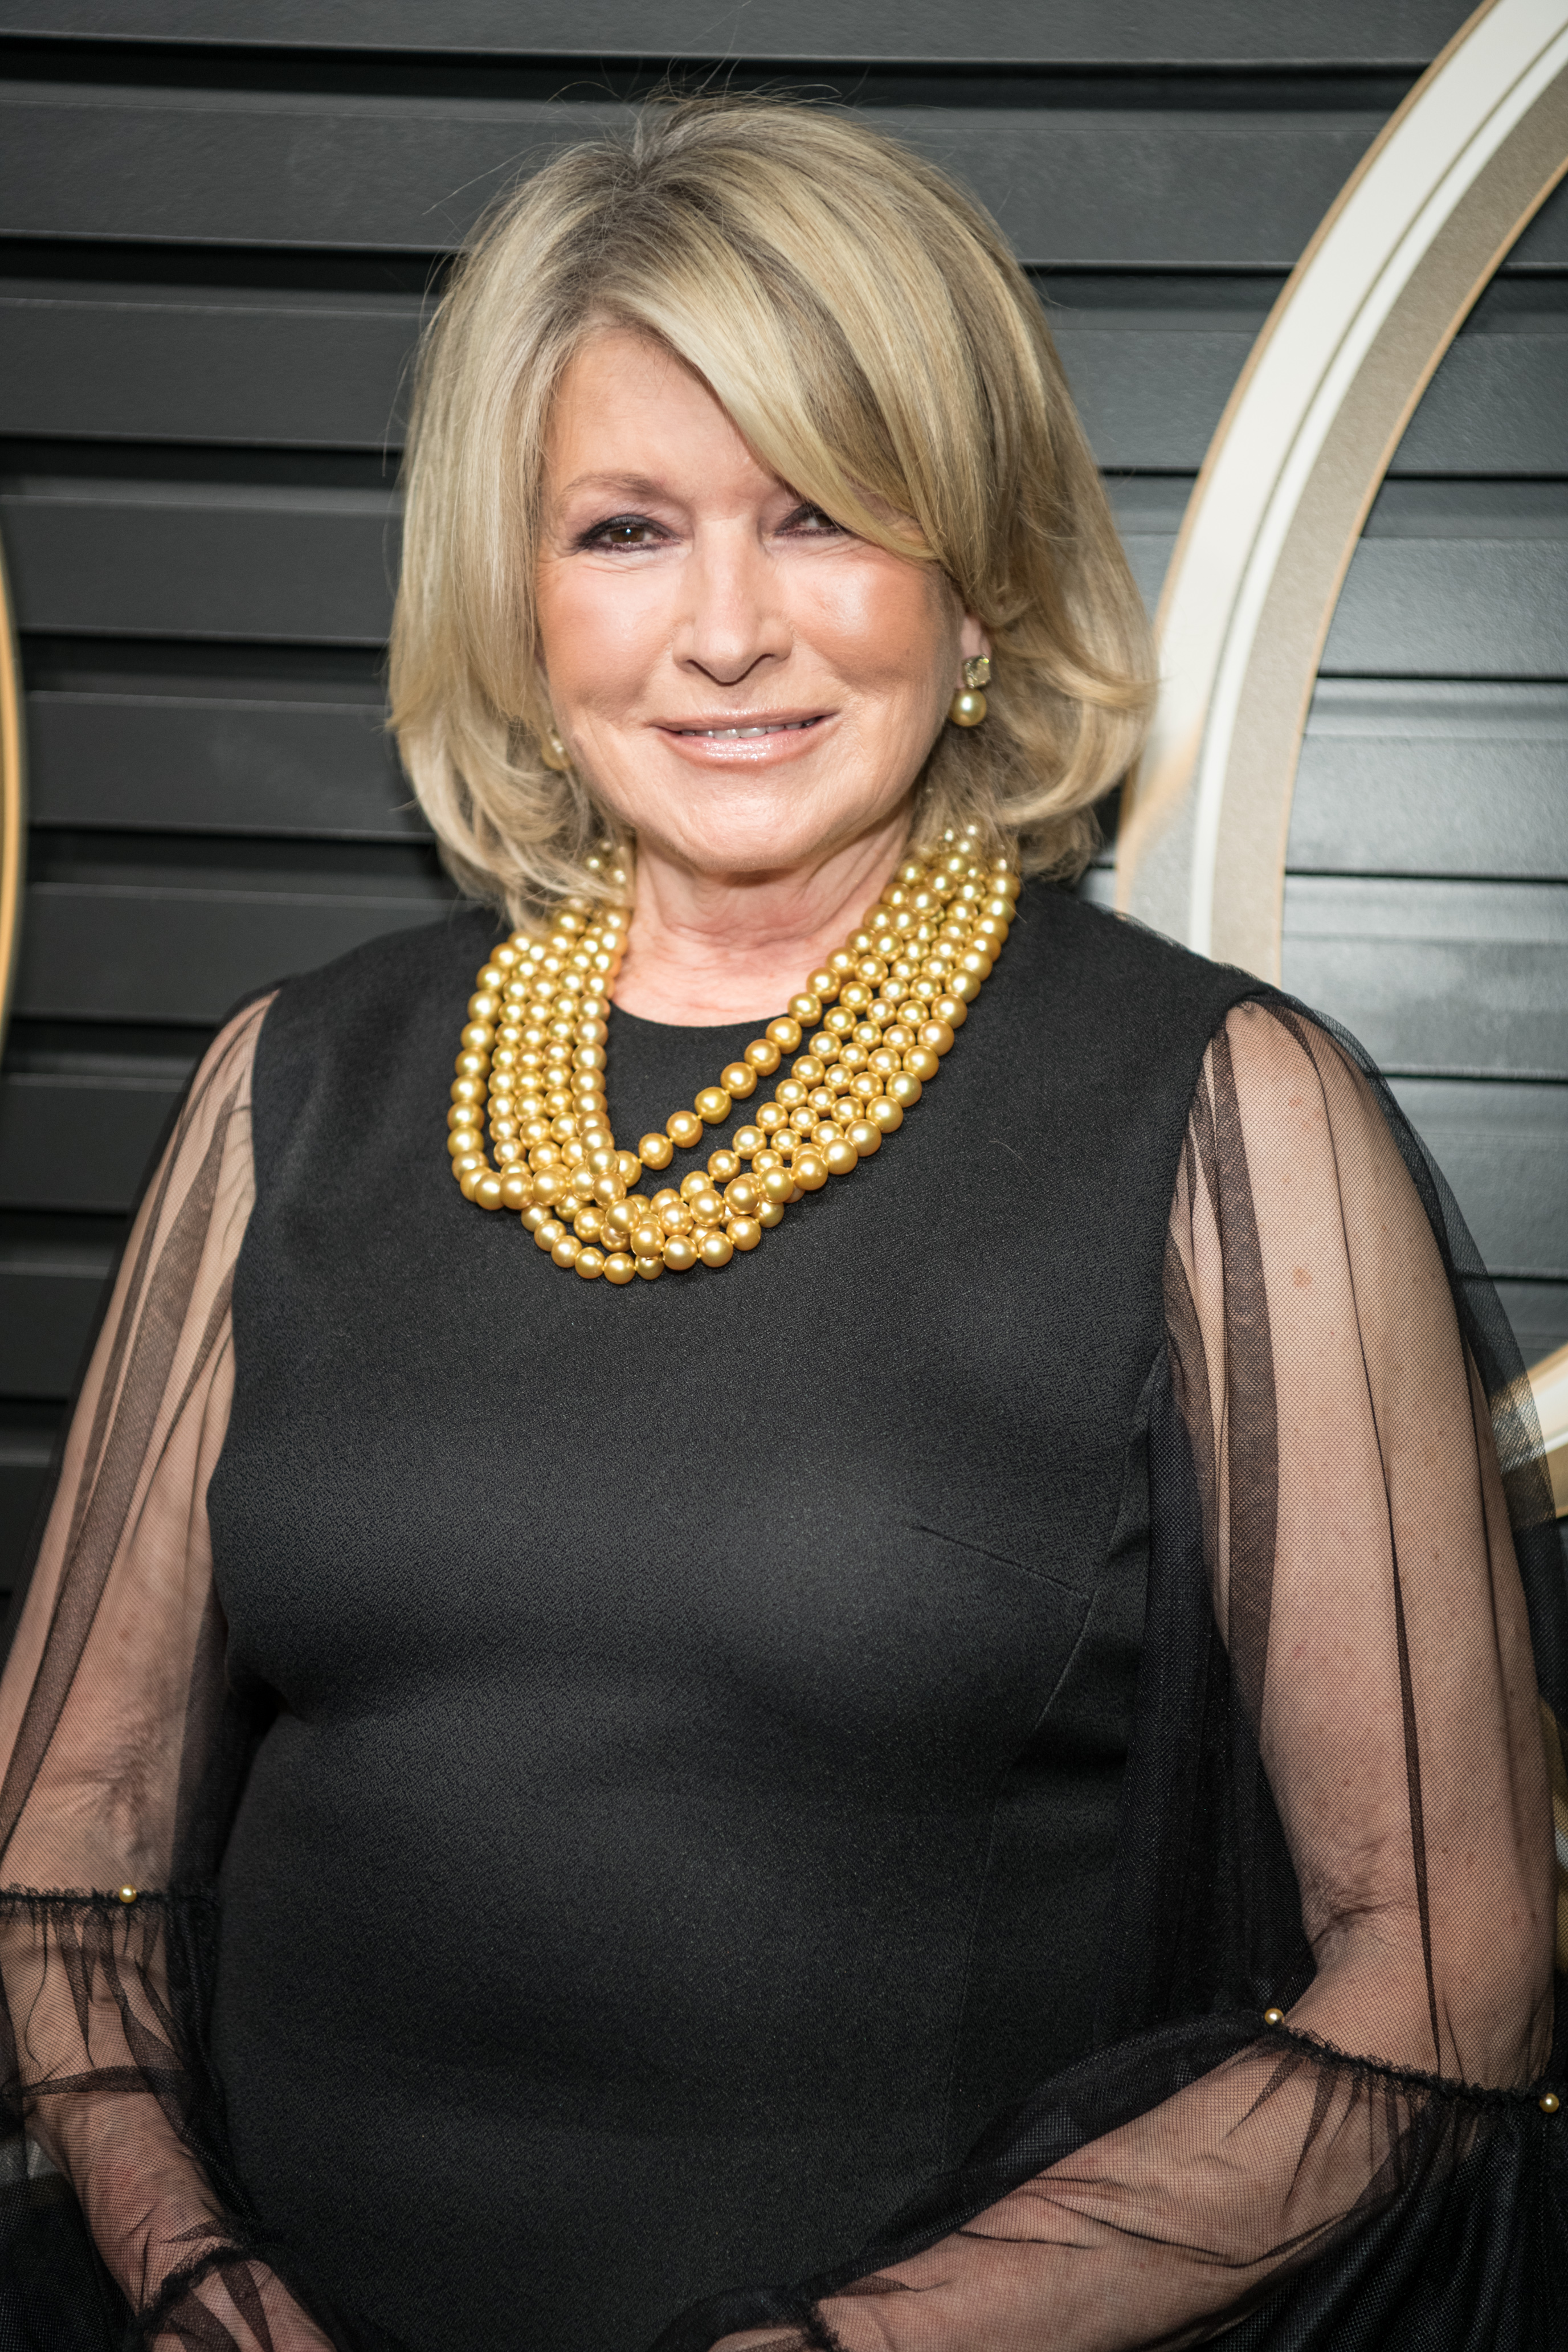 Martha Stewart during the 2020 Mercedes-Benz Annual Academy Viewing Party at Four Seasons Los Angeles in Beverly Hills | Source: Getty Images